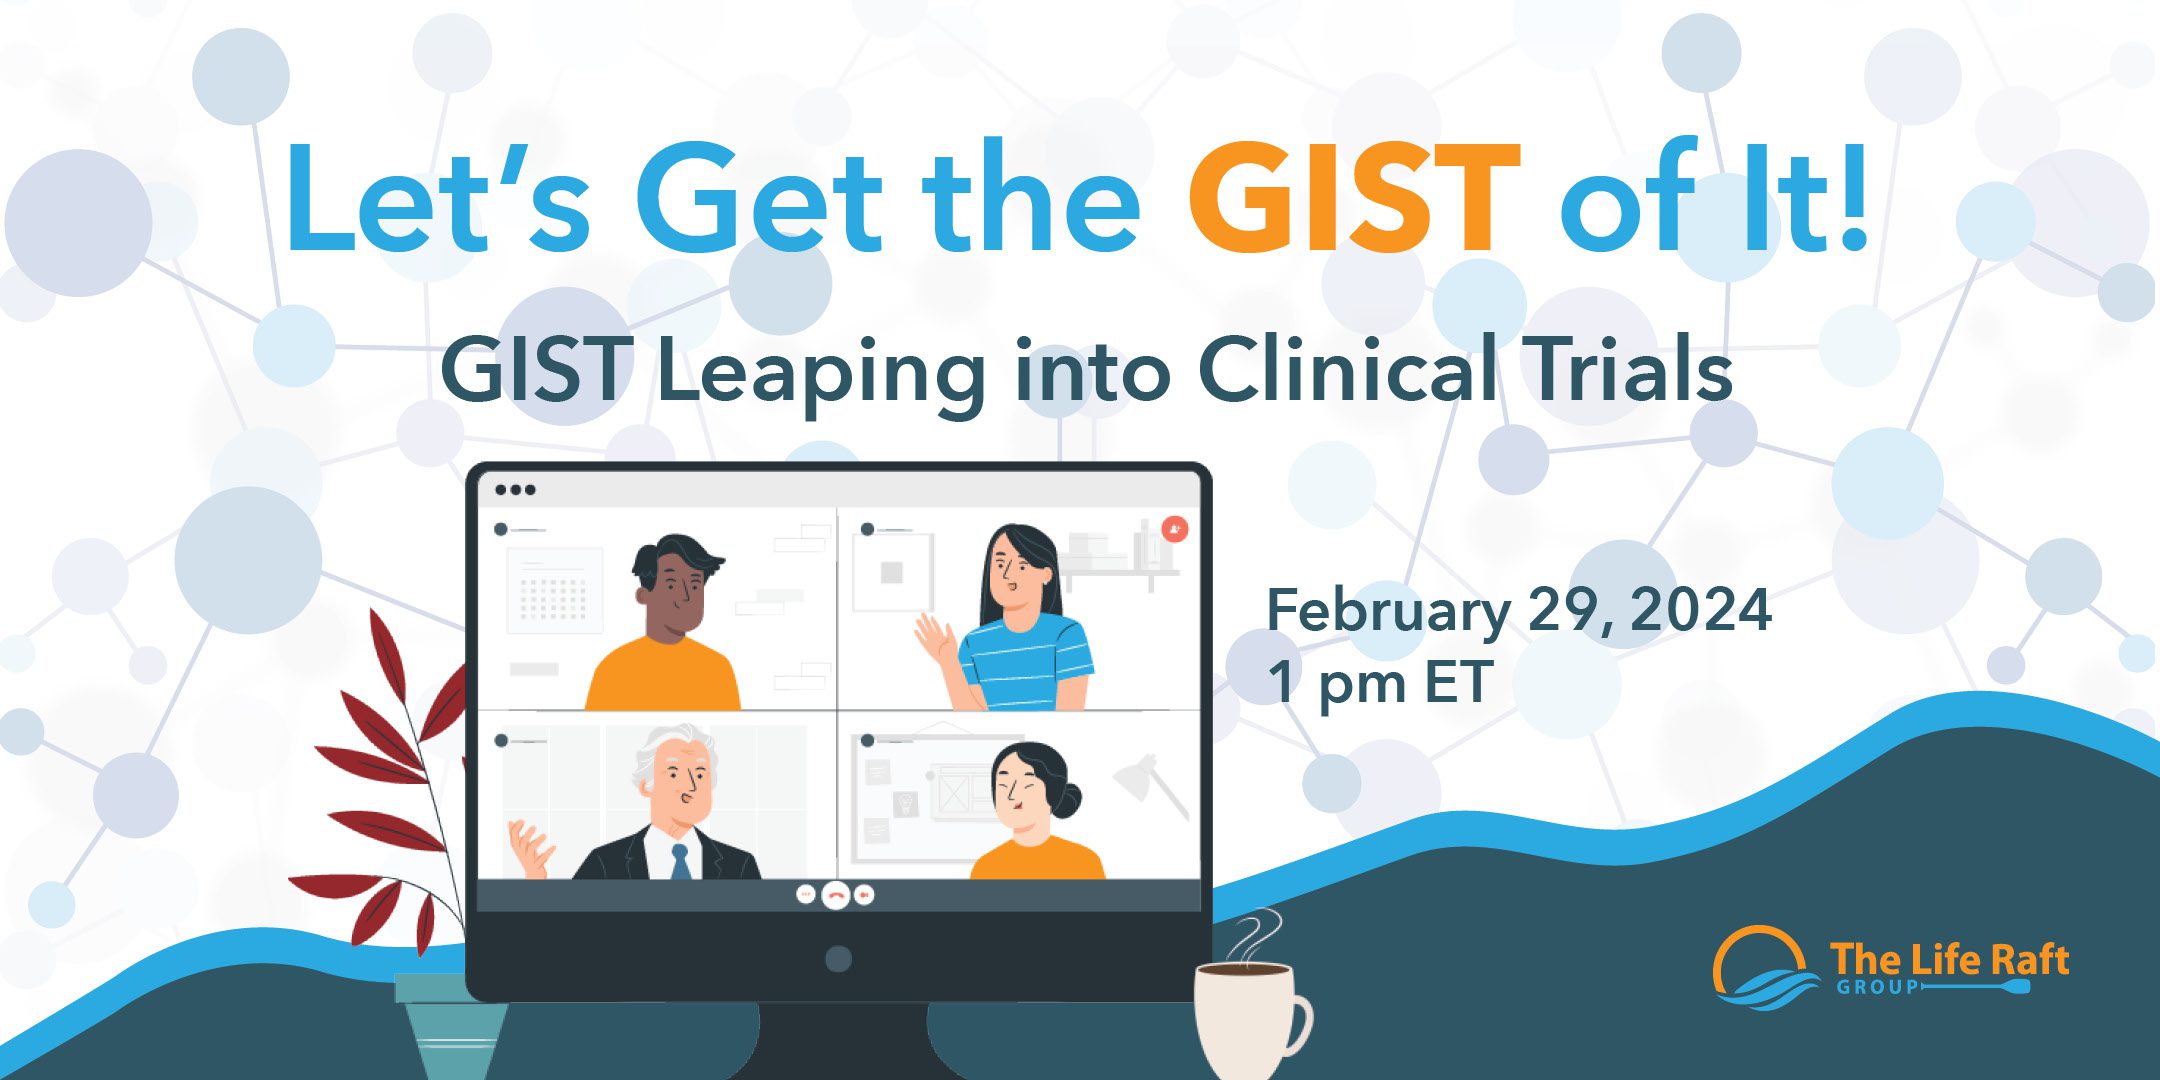 GIST Leaping into Clinical Trials